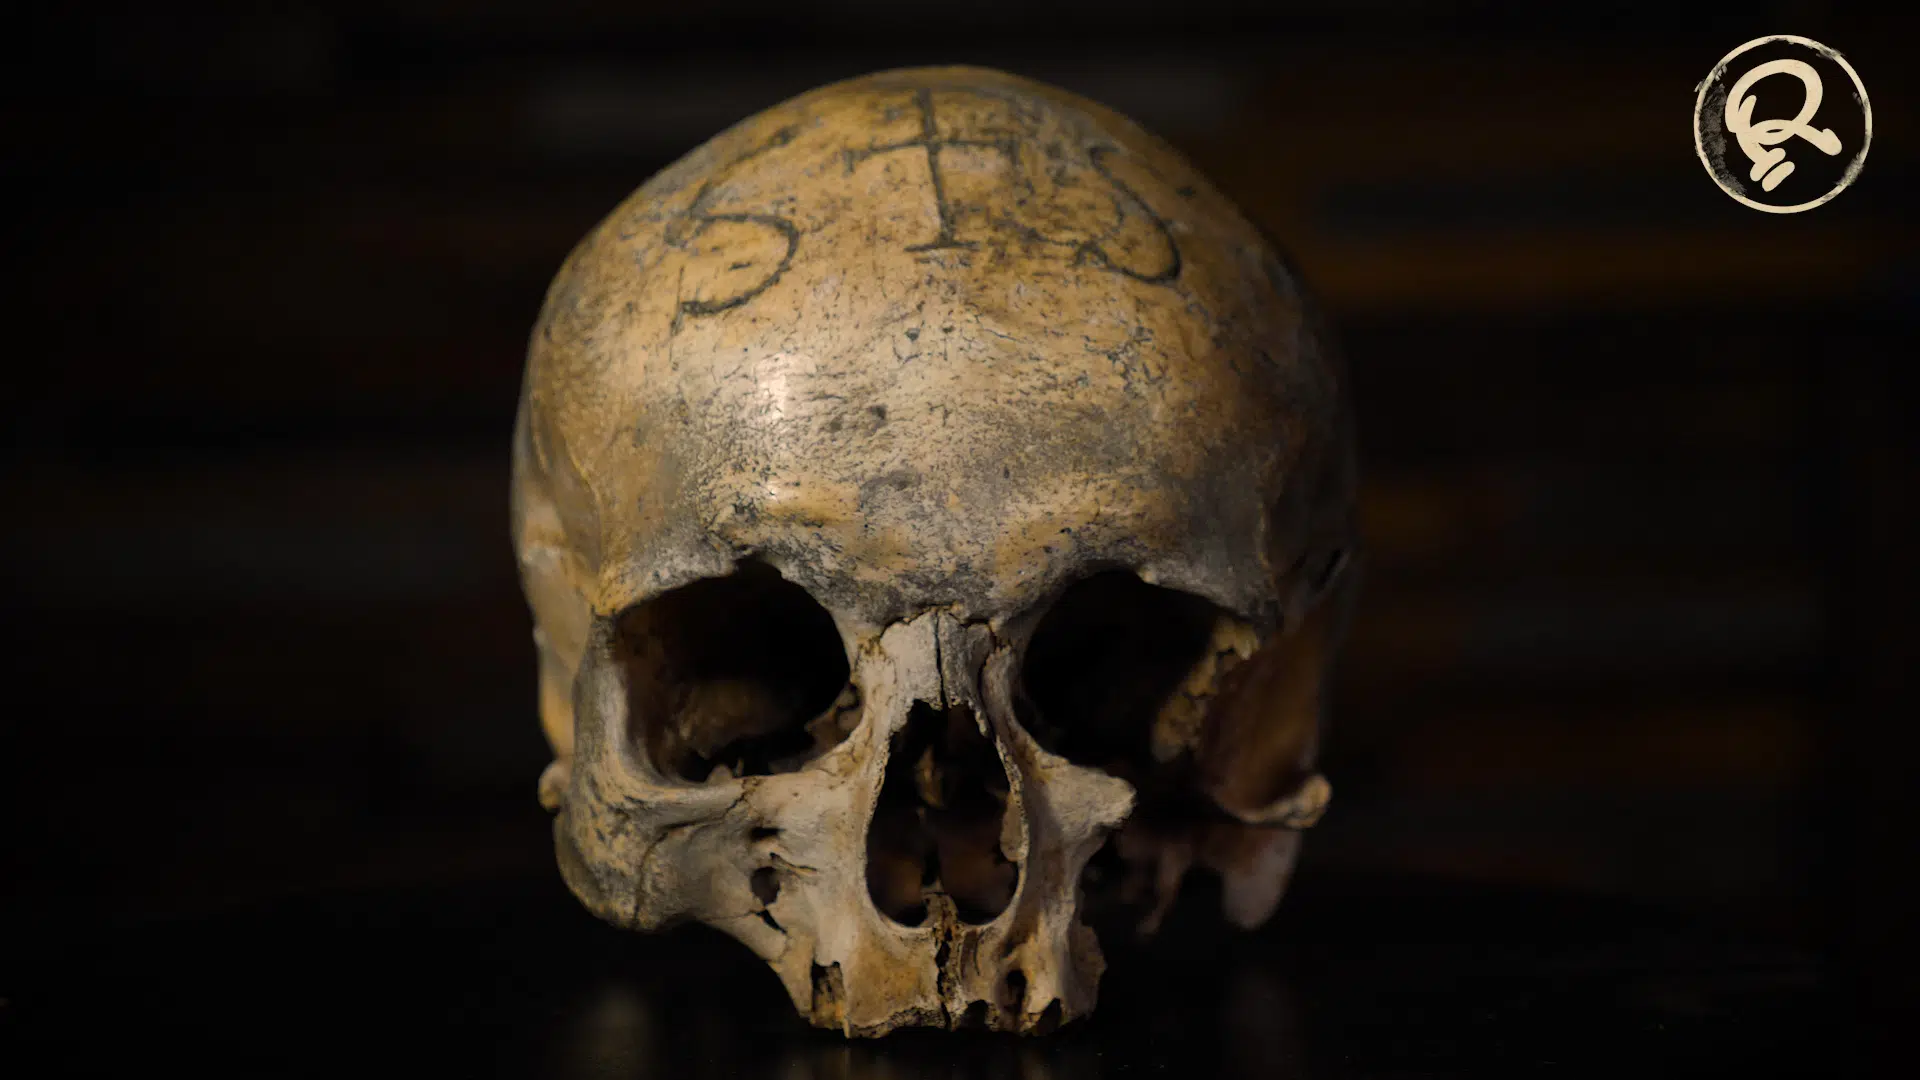 Oath Skull From The Secret Courts Of Westphalia | Nanaimo News NOW